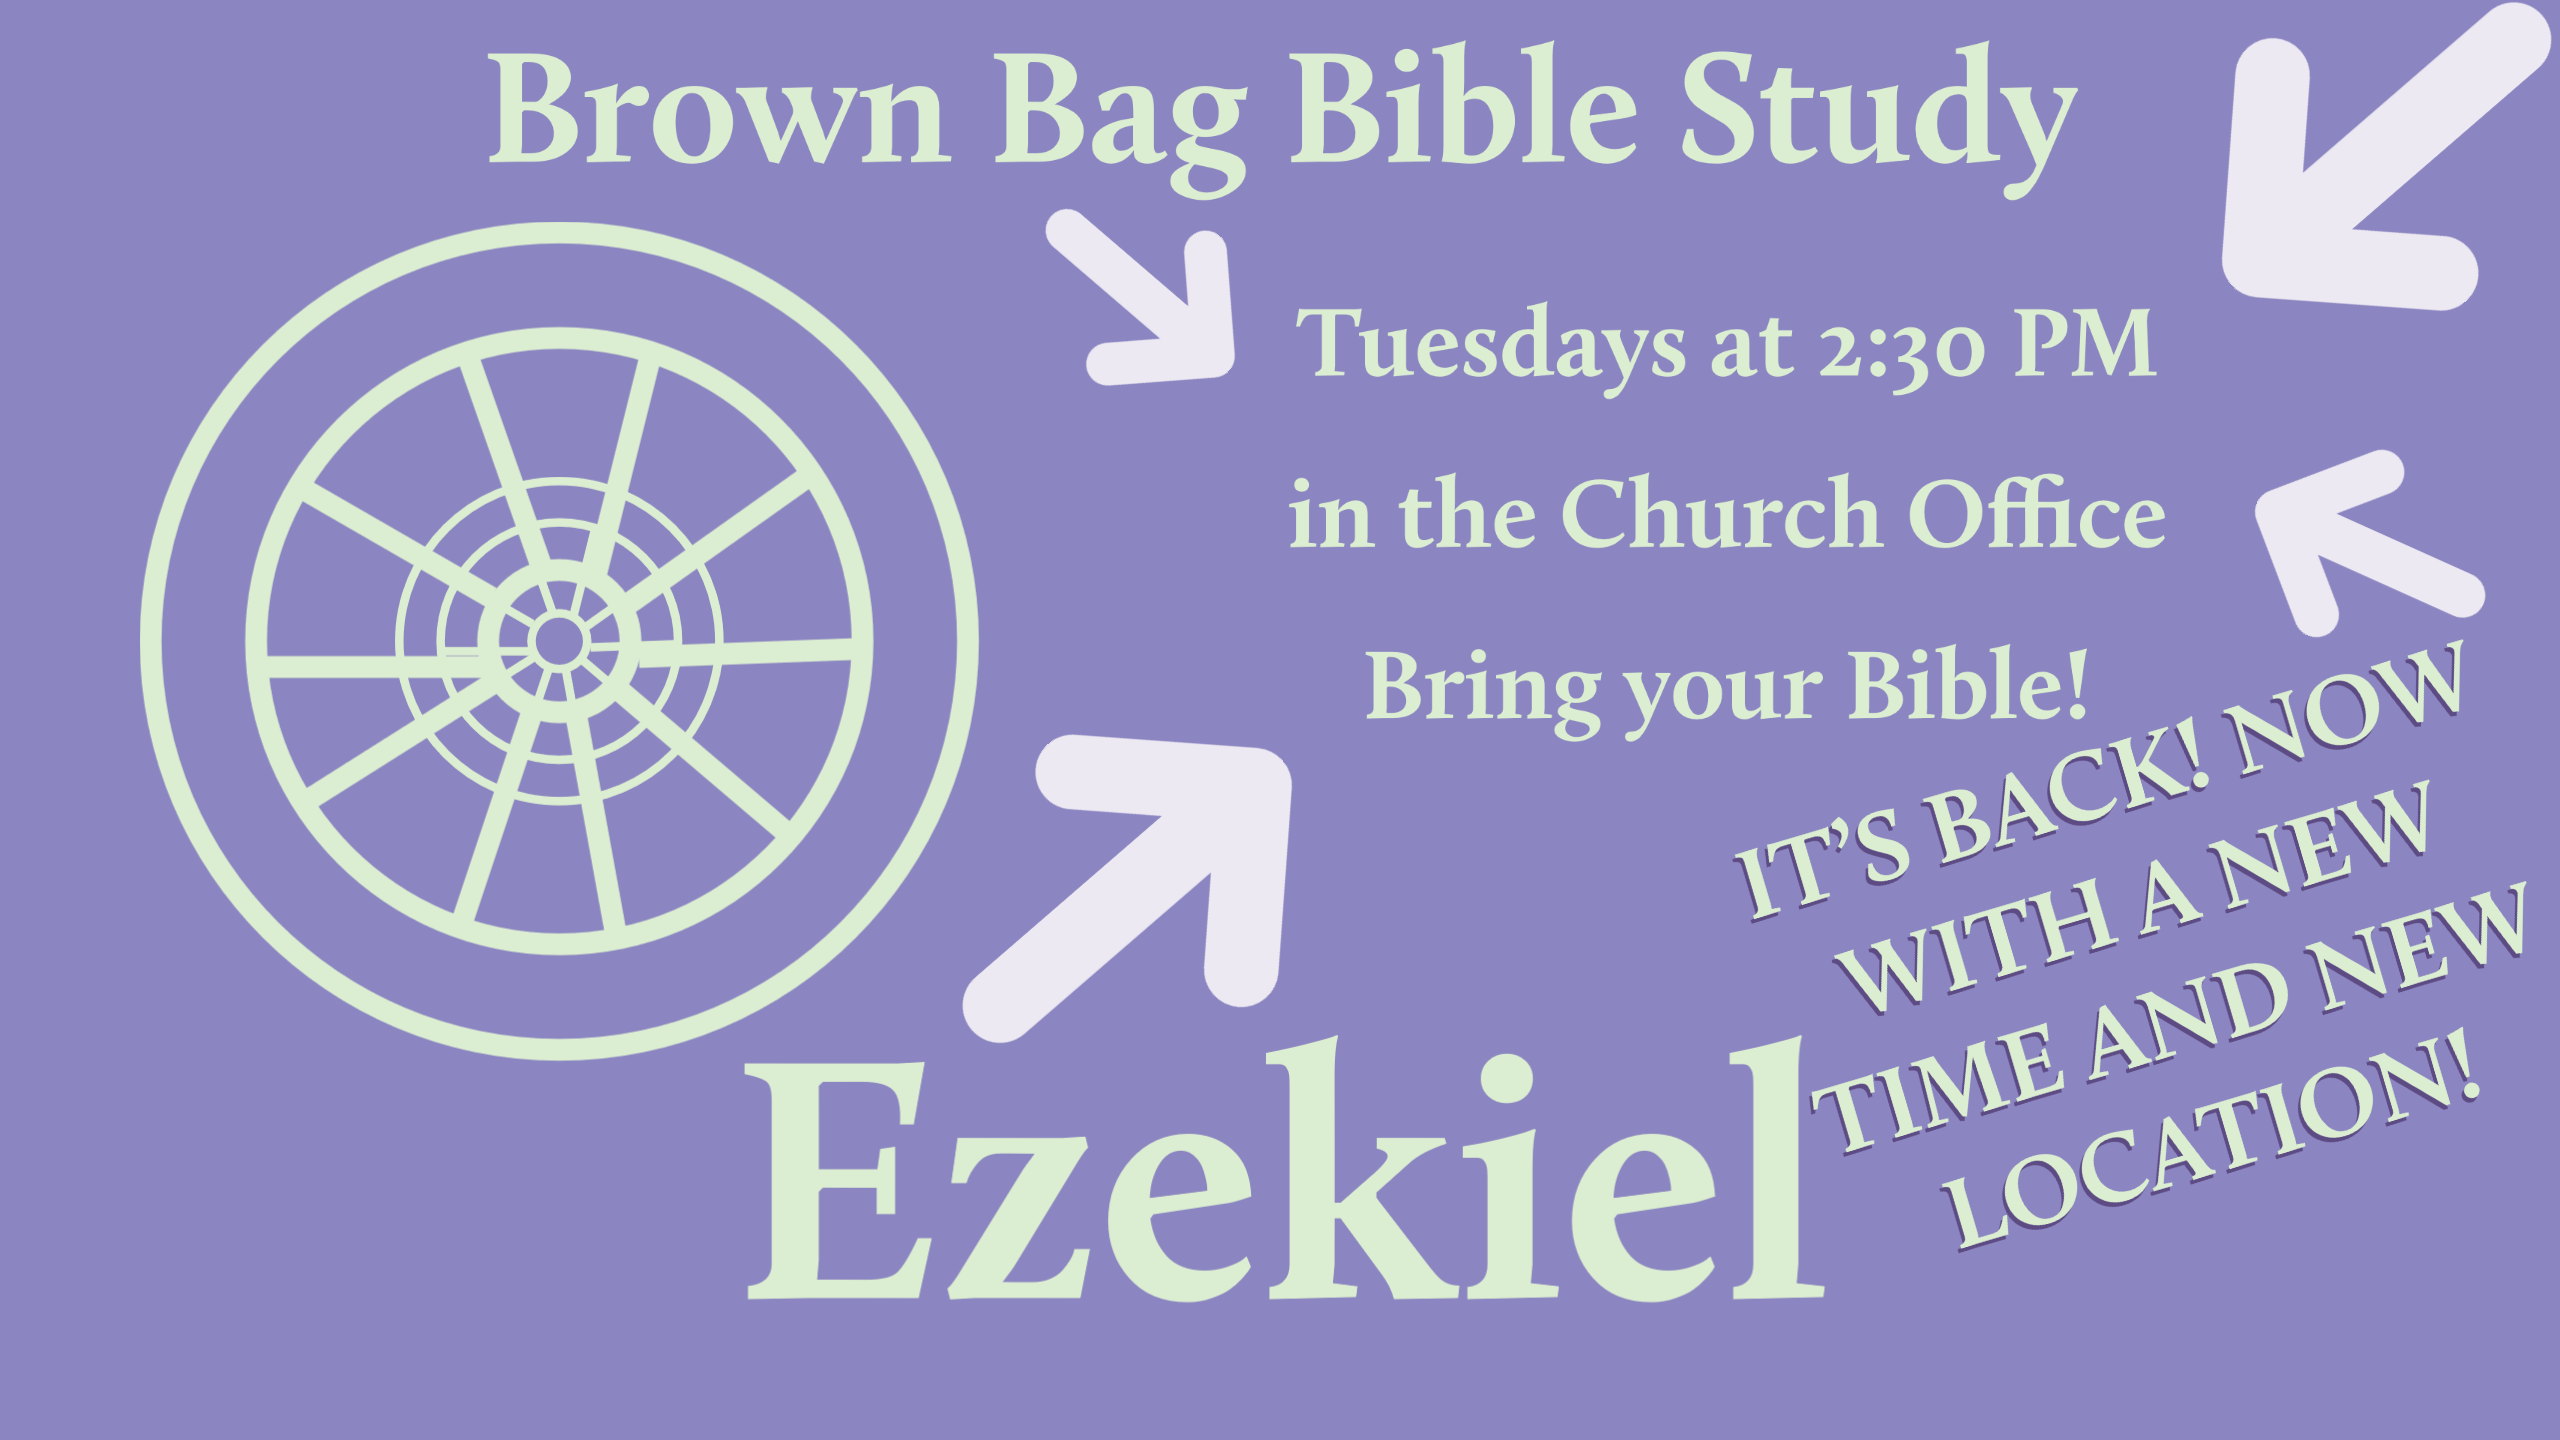 green text on a purple background reading "Brown Bag Bible Study Tuesdays at 2:30 PM in the Church Office Bring your Bible! It's back! Now with a new time and new location! Ezekiel" with a green icon of a wheel and four light purple arrows pointing at the text